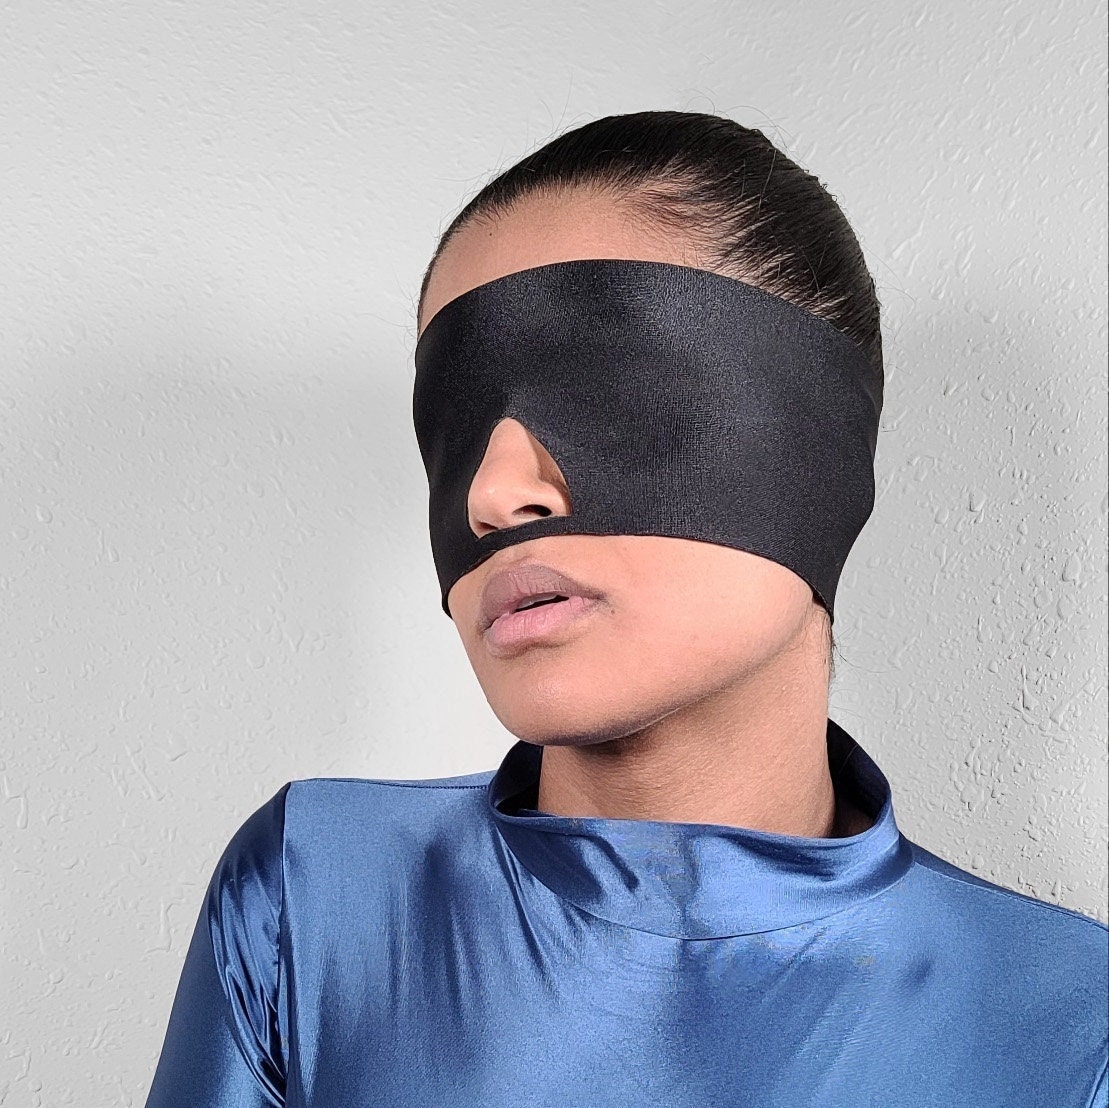 Infinity Blindfold mature 